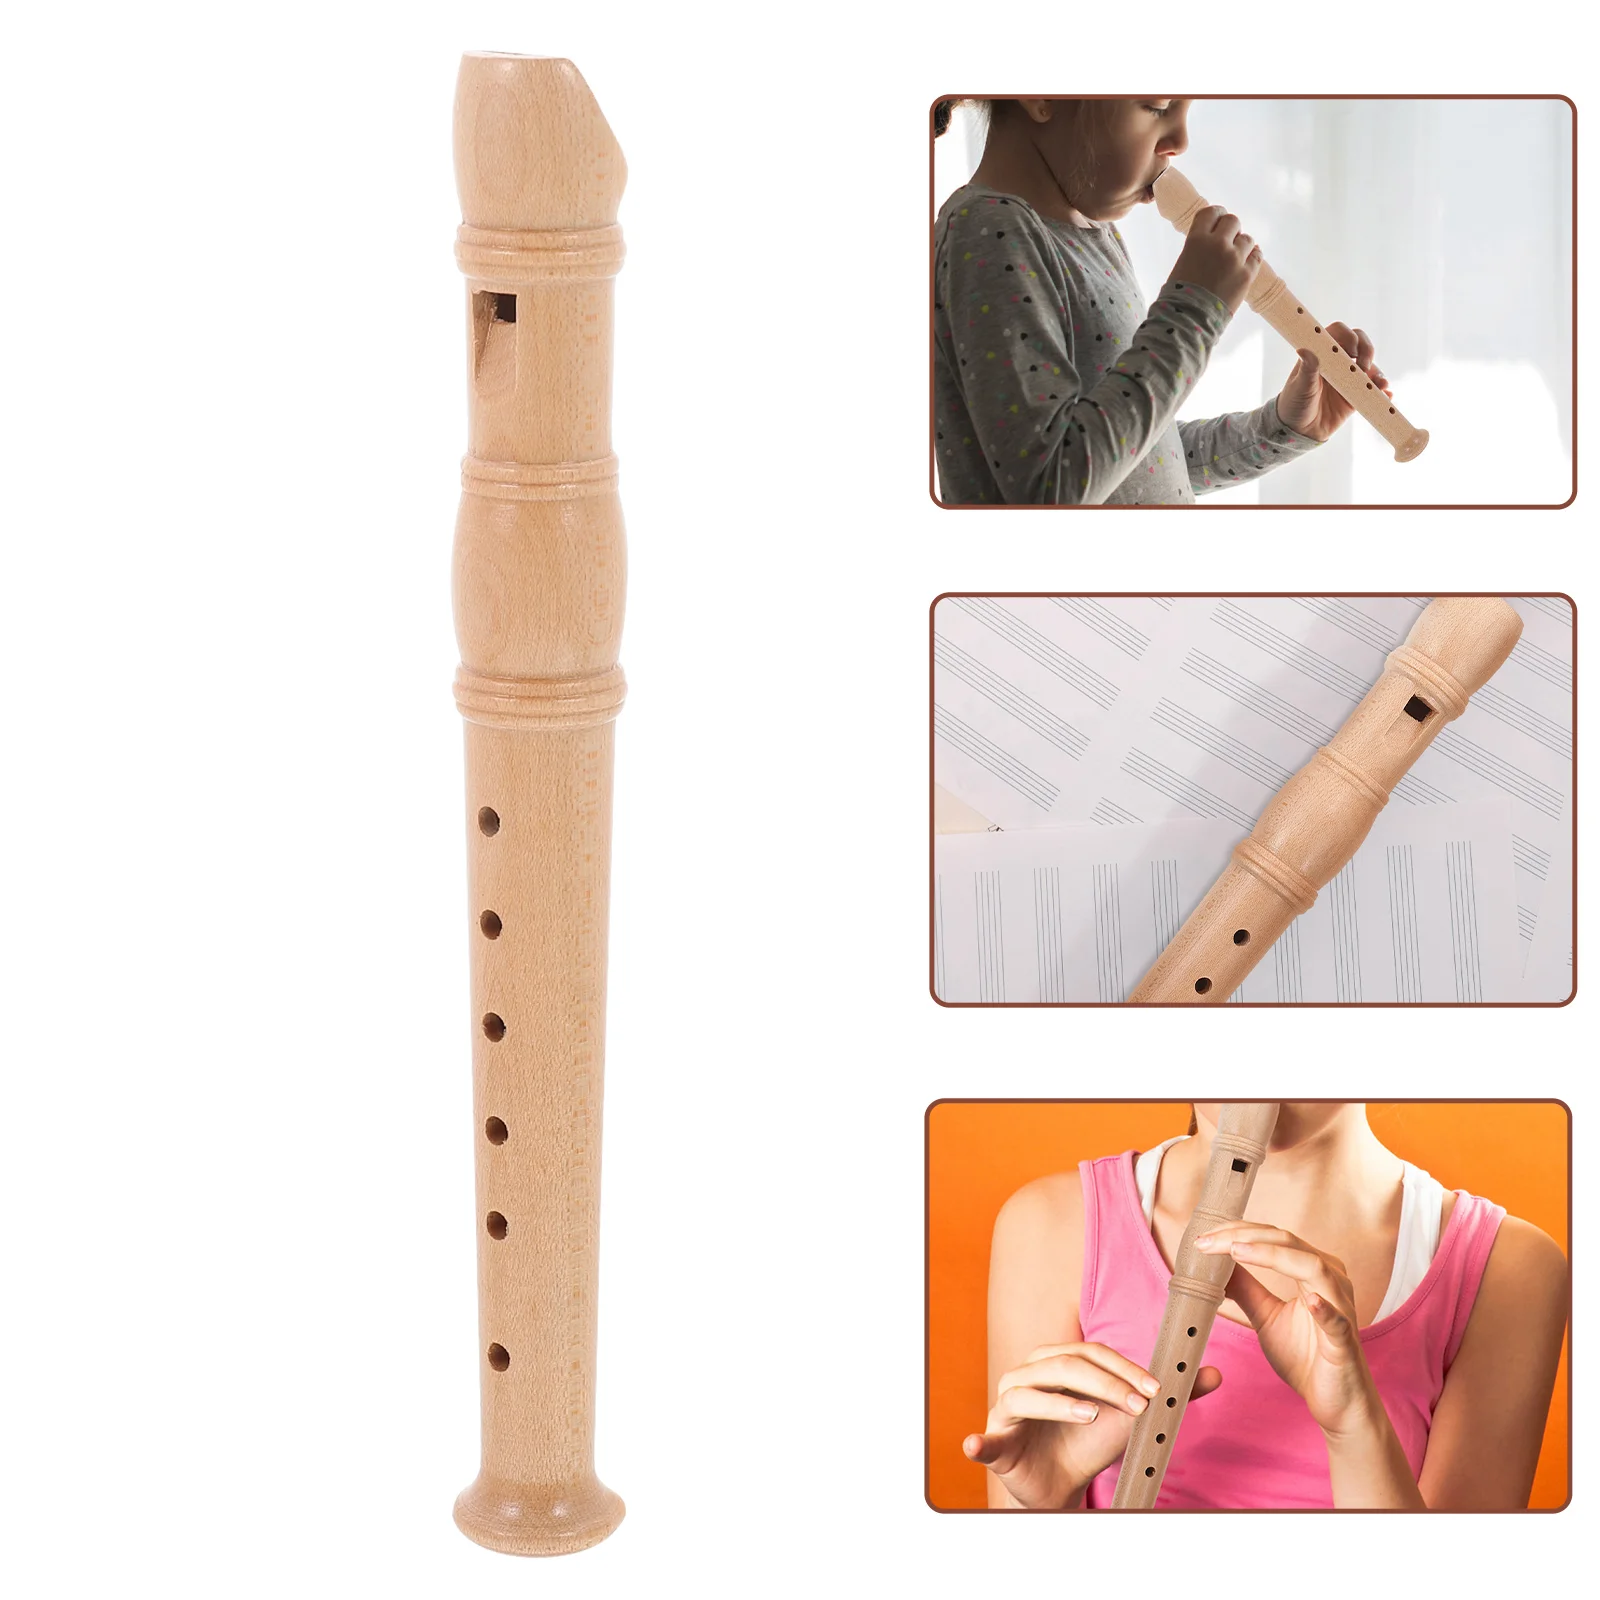 

Deeds Toy Kids Professional Clarinet 6-hole Wind Instrument Student Practice Wood Beginners Pupils Soprano Recorder